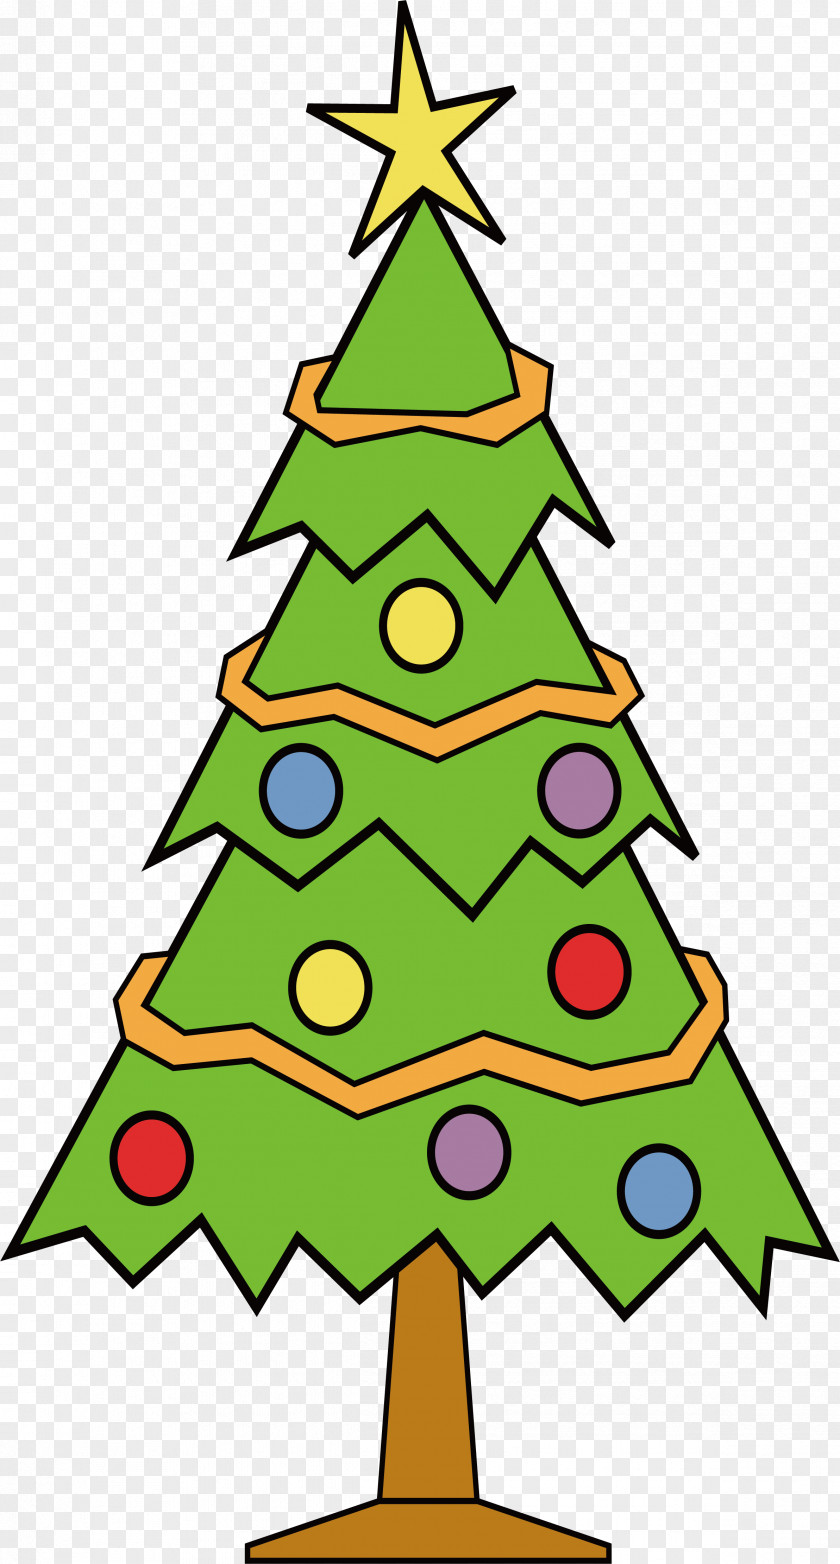 Exquisite Christmas Tree Design Free Content Clip Art PNG